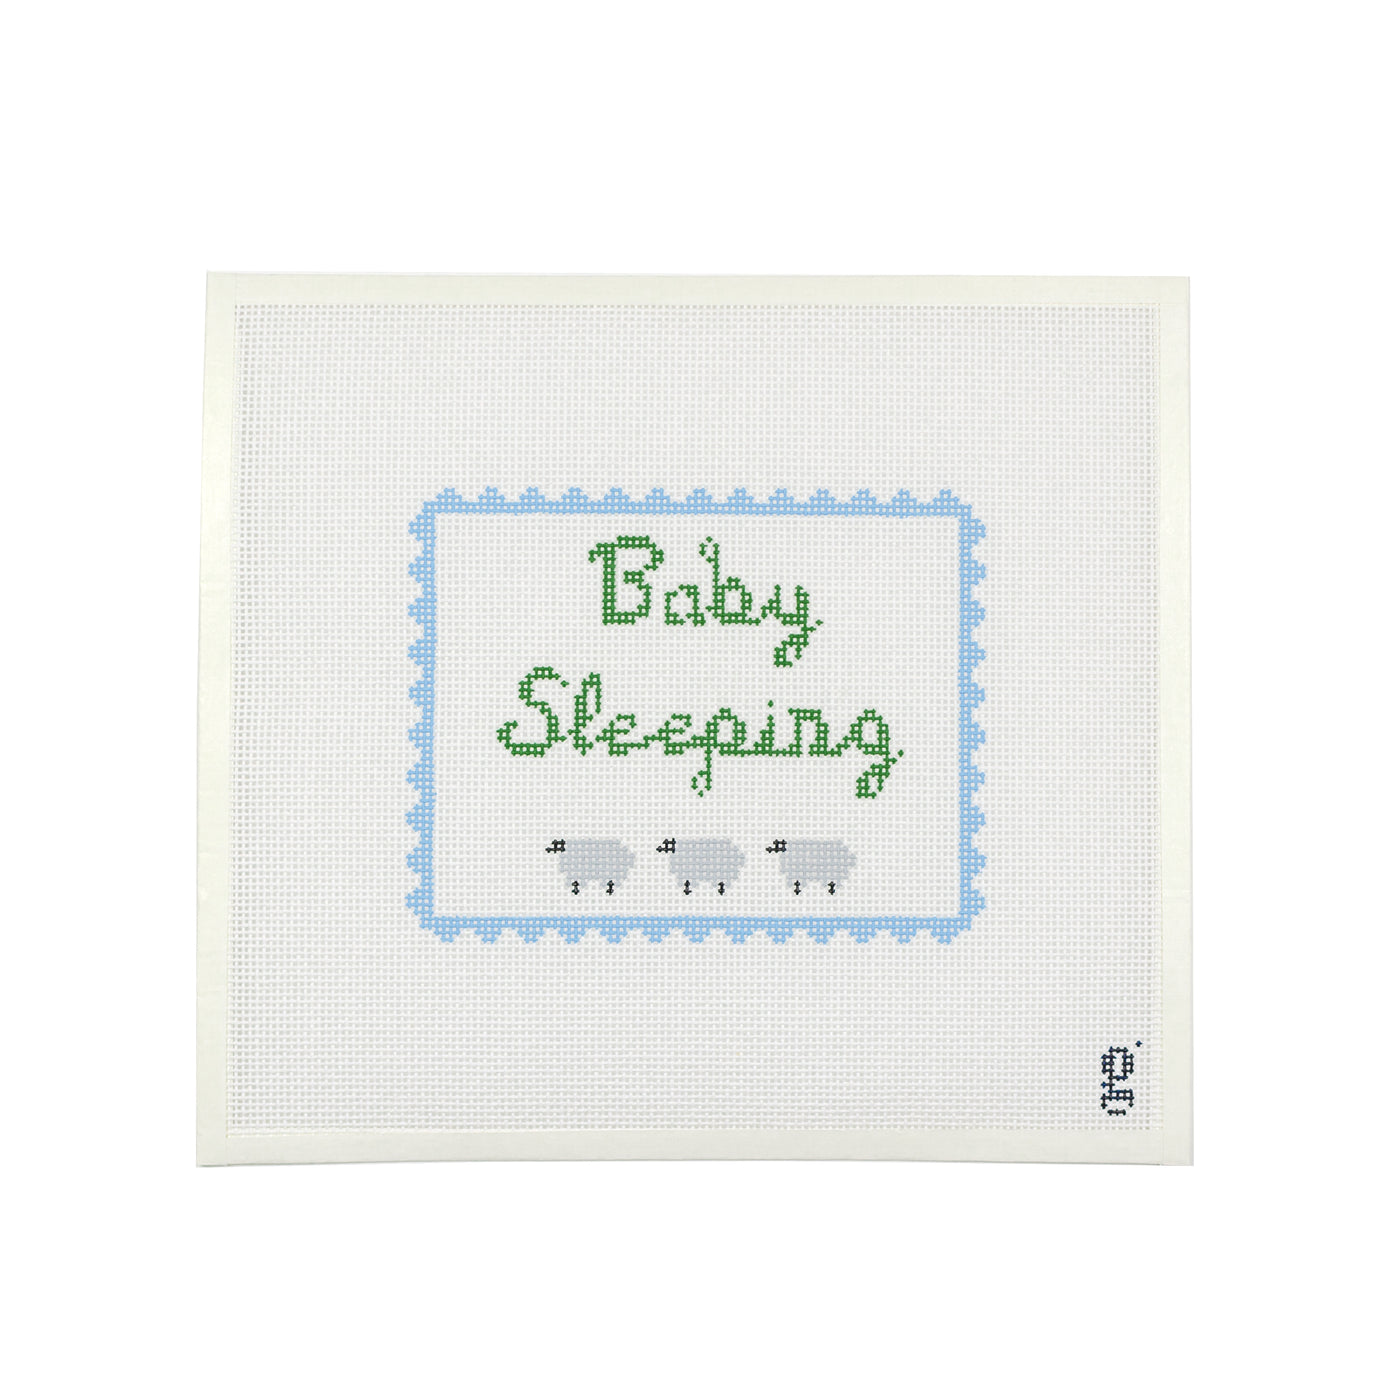 Painted needlepoint canvas with light blue scalloped border, green script letters spelling out "Baby Sleeping" with 3 grey sheep at the bottom